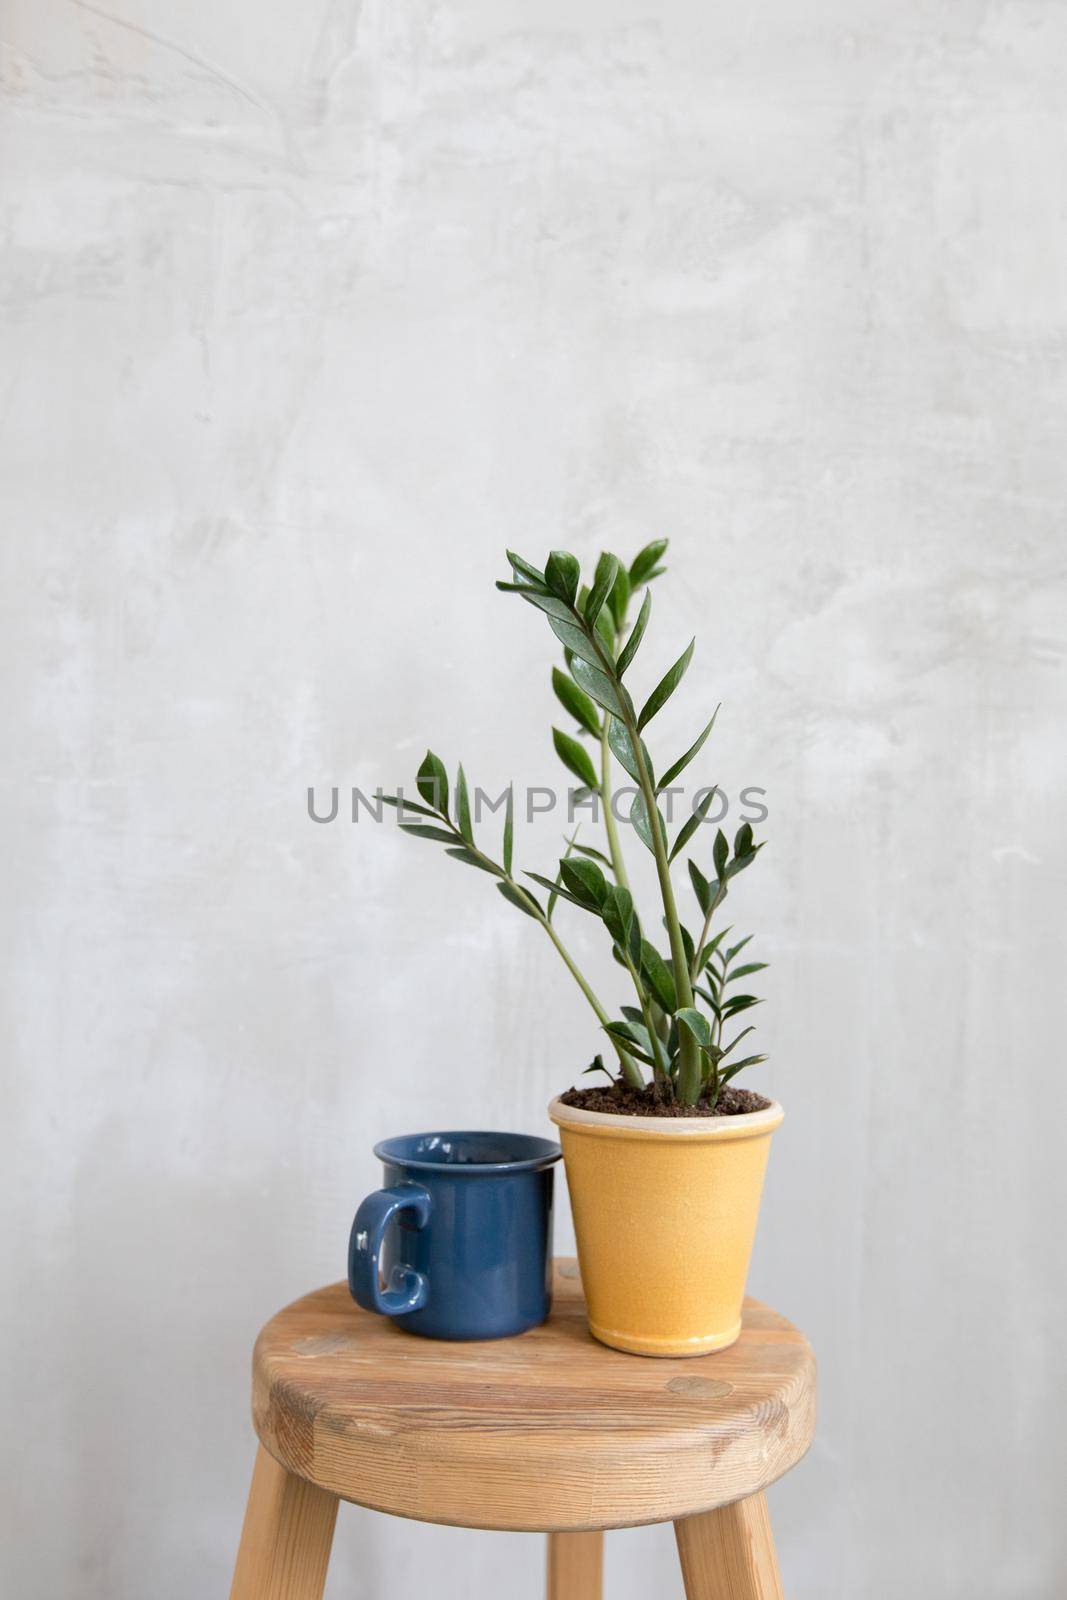 Composed flowerpot and mug by Demkat